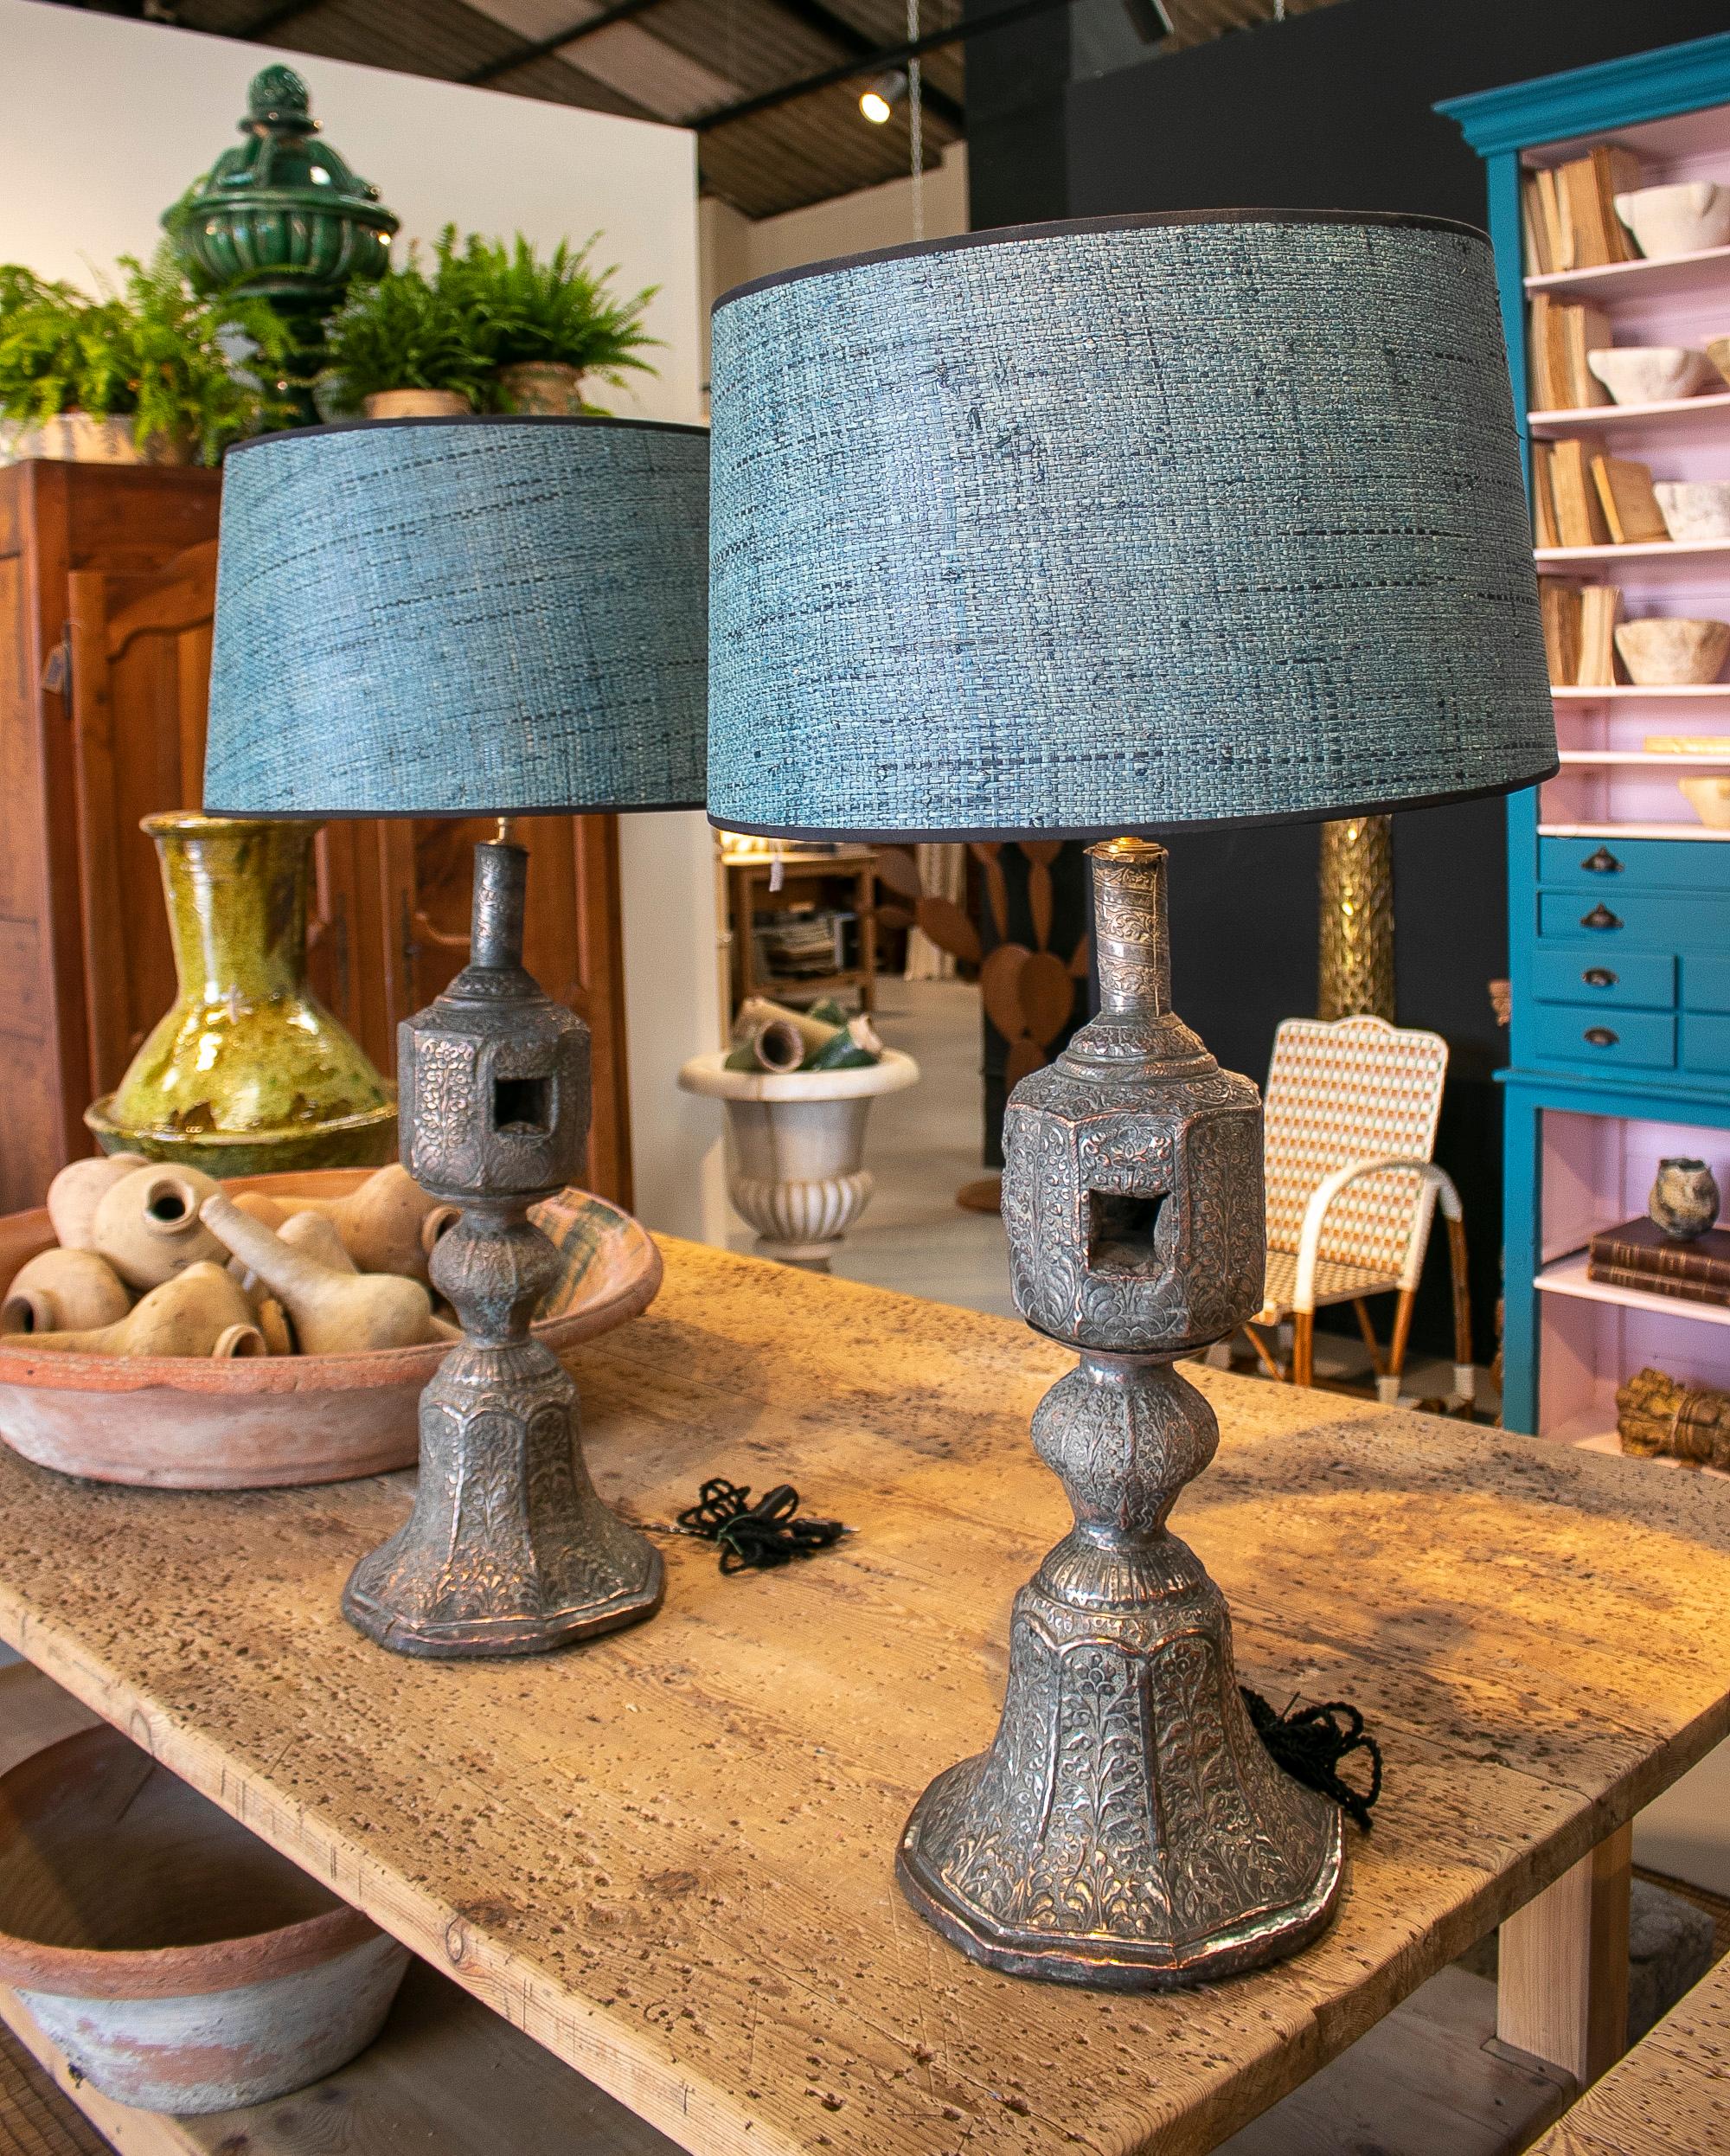 Pair of 1920s Indian silvered metal bed legs turned table lamps. 

Lampshades not included in price. 
 
Dimensions without lampshades: 76 x 30 x 30cm
Dimensions with lampshades: 97 x 50cm.